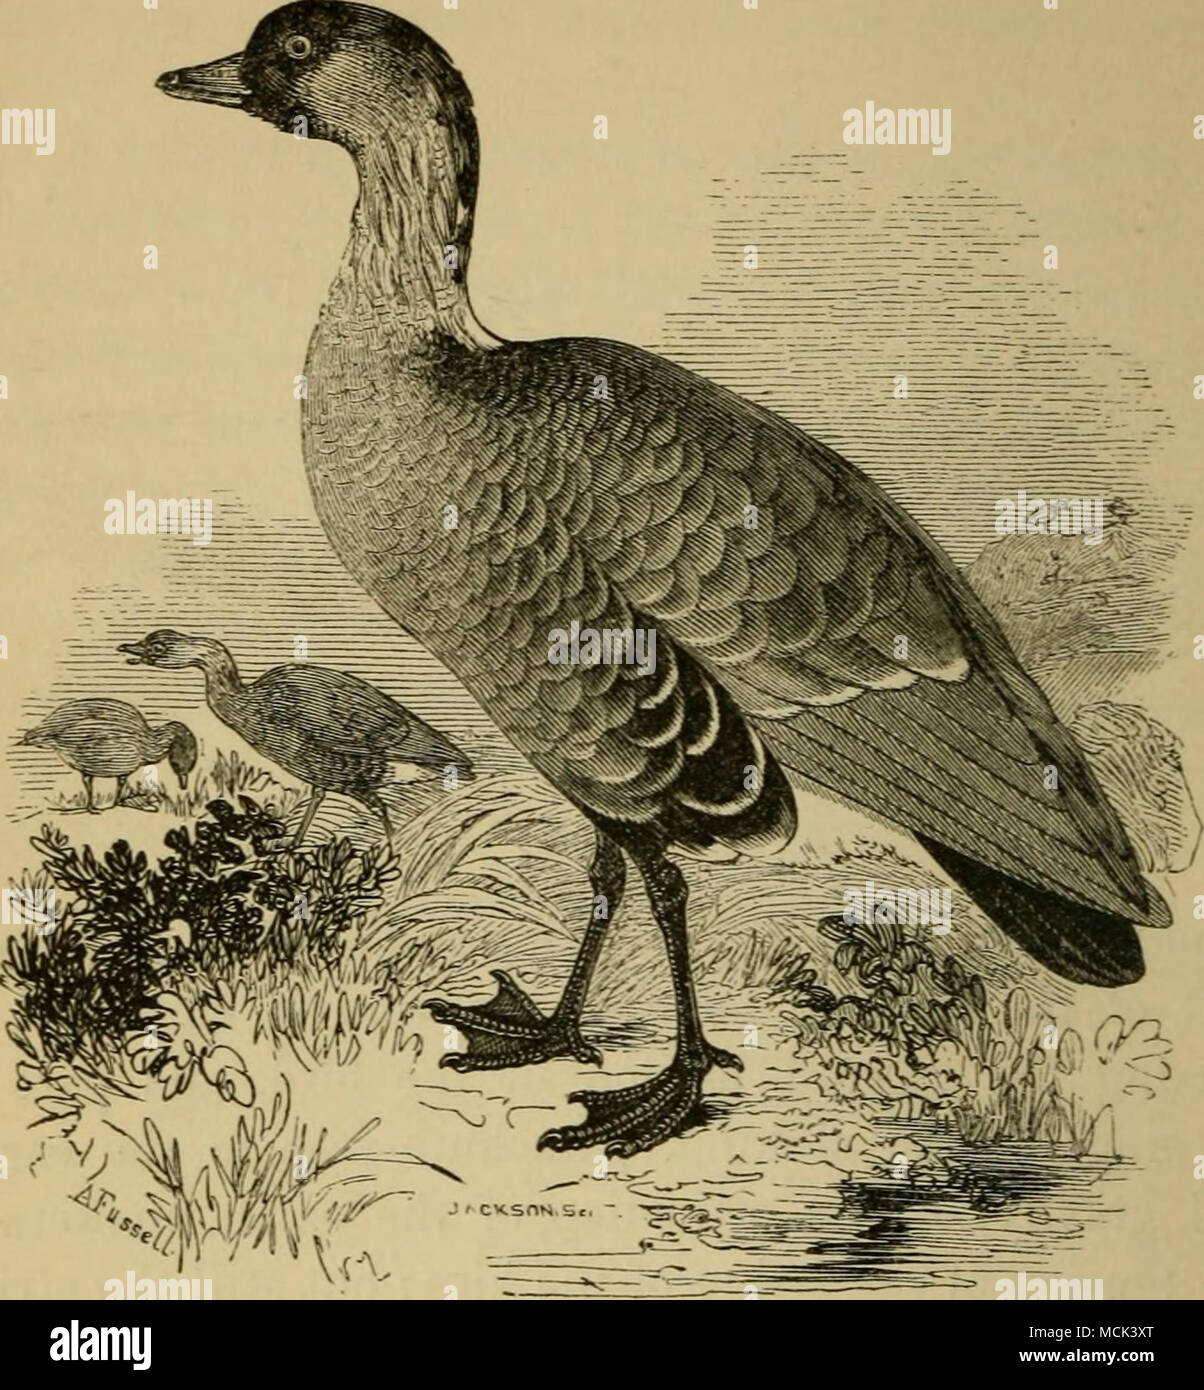 . Sandwich Island Bernicle {Bernicla * Sandvicensis). CHAPTER XIII. THE SANDWICH ISLAND GOOSE. Stay-at-home travellers.—Home of the Sandwich Bernicle.—Natural dispo- sition.—Its claims on our patronage.—Natural perfume.—Voice.—First his- torical notice.—Erroneous nomenclature.—Obstinate pugnacity.—A parallel.— Diet.—Weight.—Plumage.—Increase. One great charm in Natural History is that it leads the student through such an ever-changing panorama of * Cuvier saj's, &quot;The Bernicles are distinguishable from the com- mon Gee3e by a shorter, smaller bill, whose edges are not apparent beyond the e Stock Photo